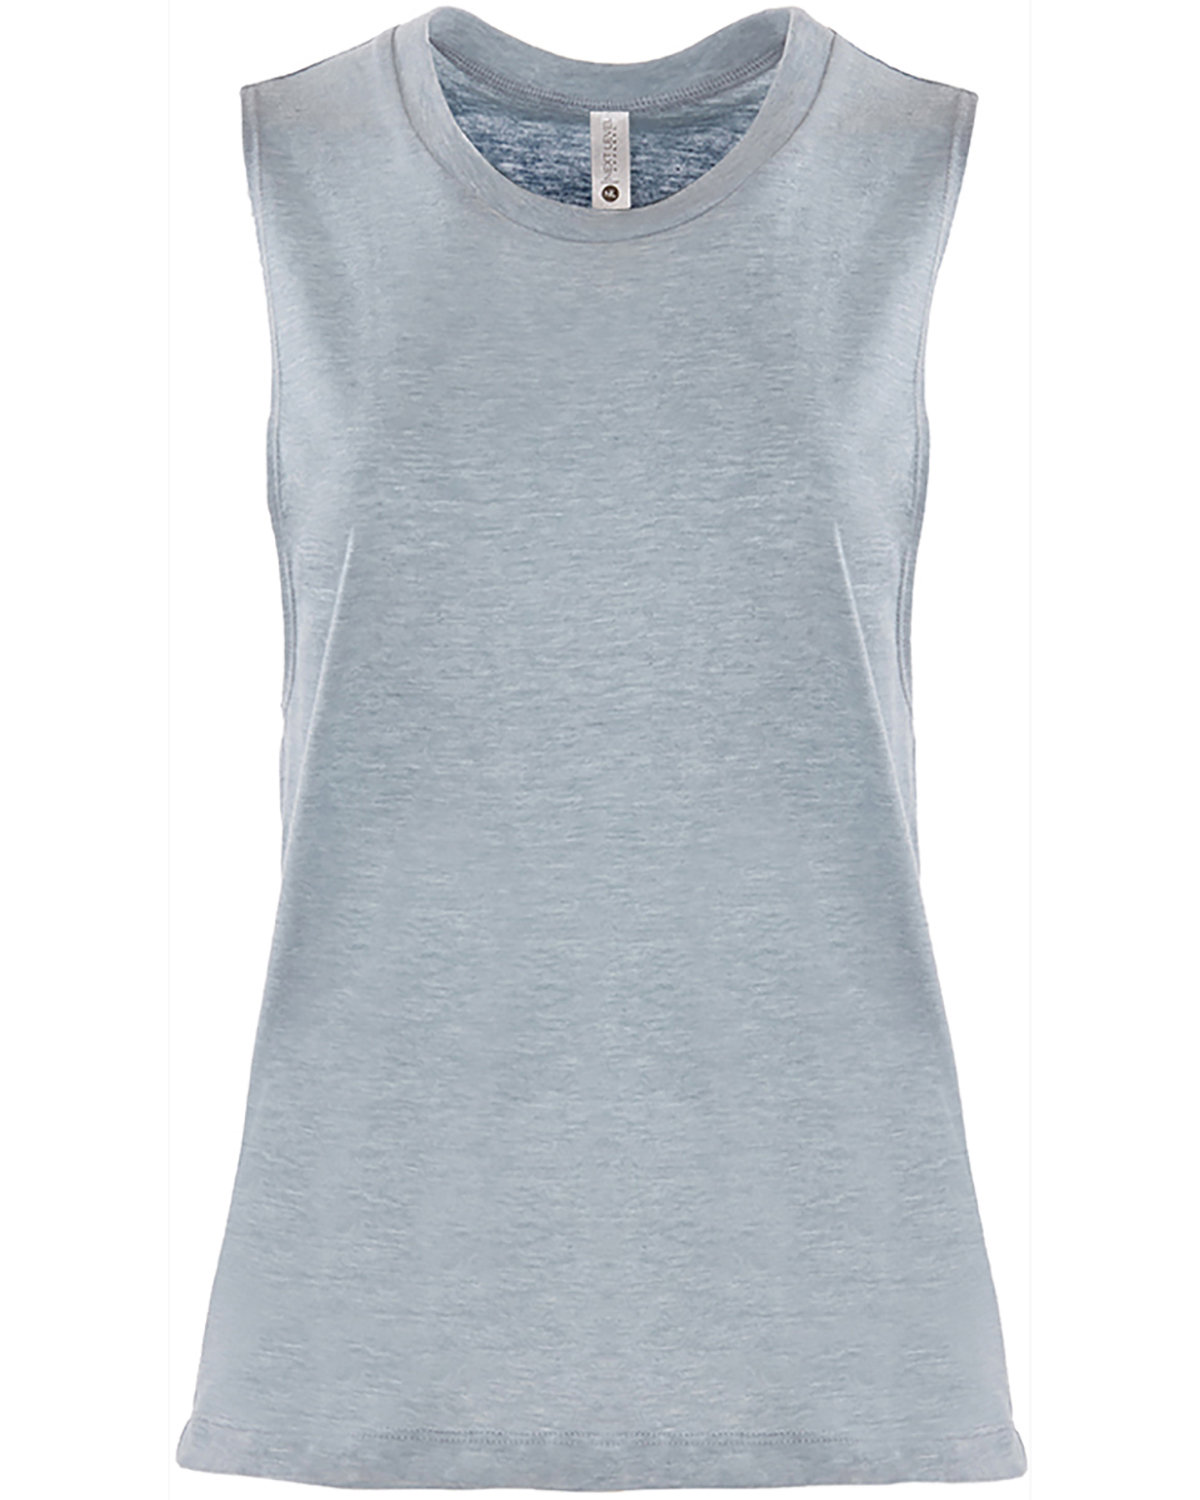 Next Level Apparel Ladies' Festival Muscle Tank | alphabroder